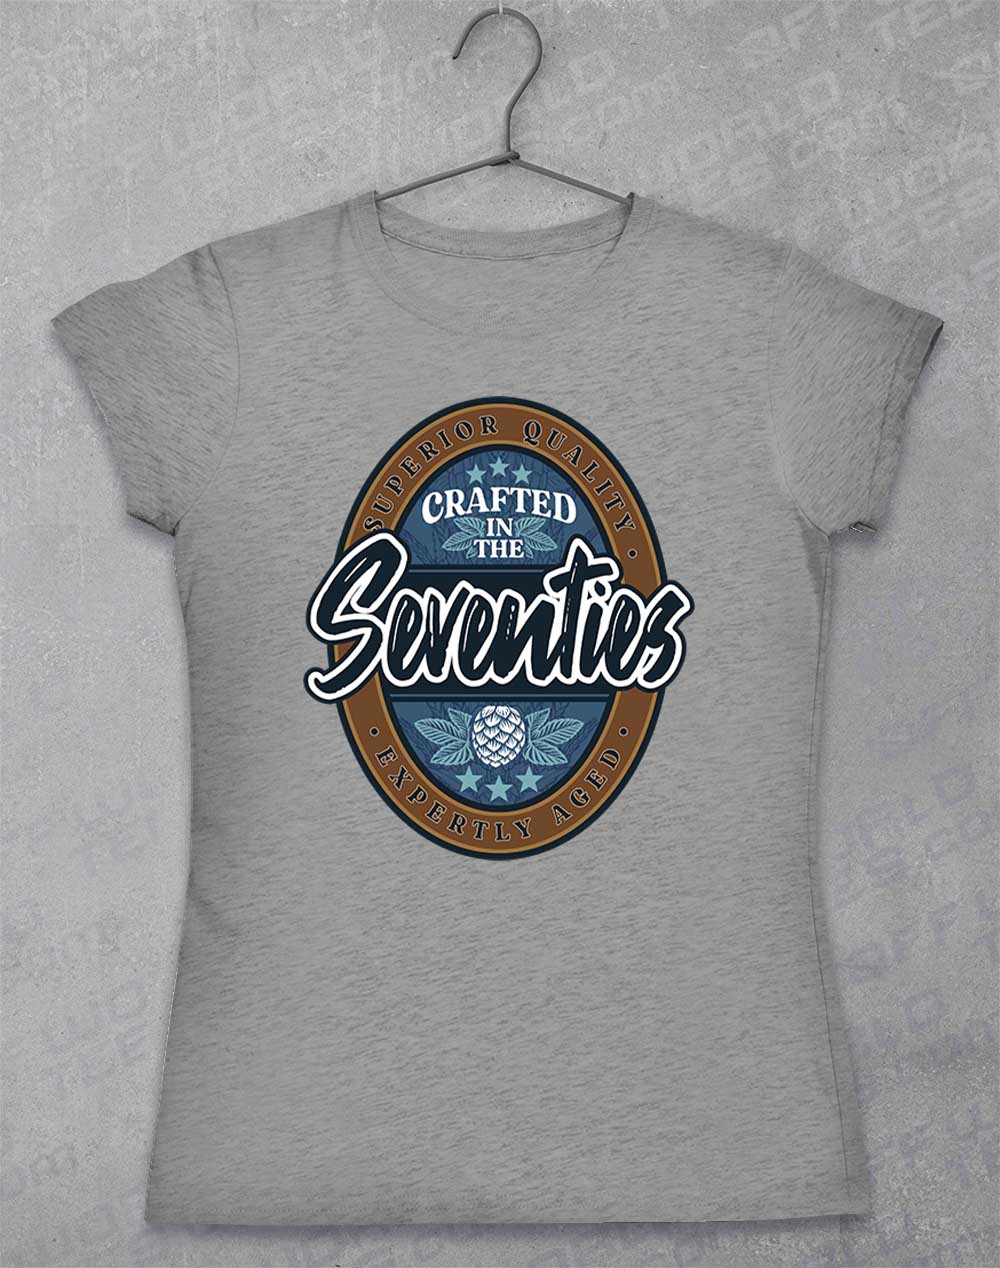 Crafted in the Seventies Women's T-Shirt